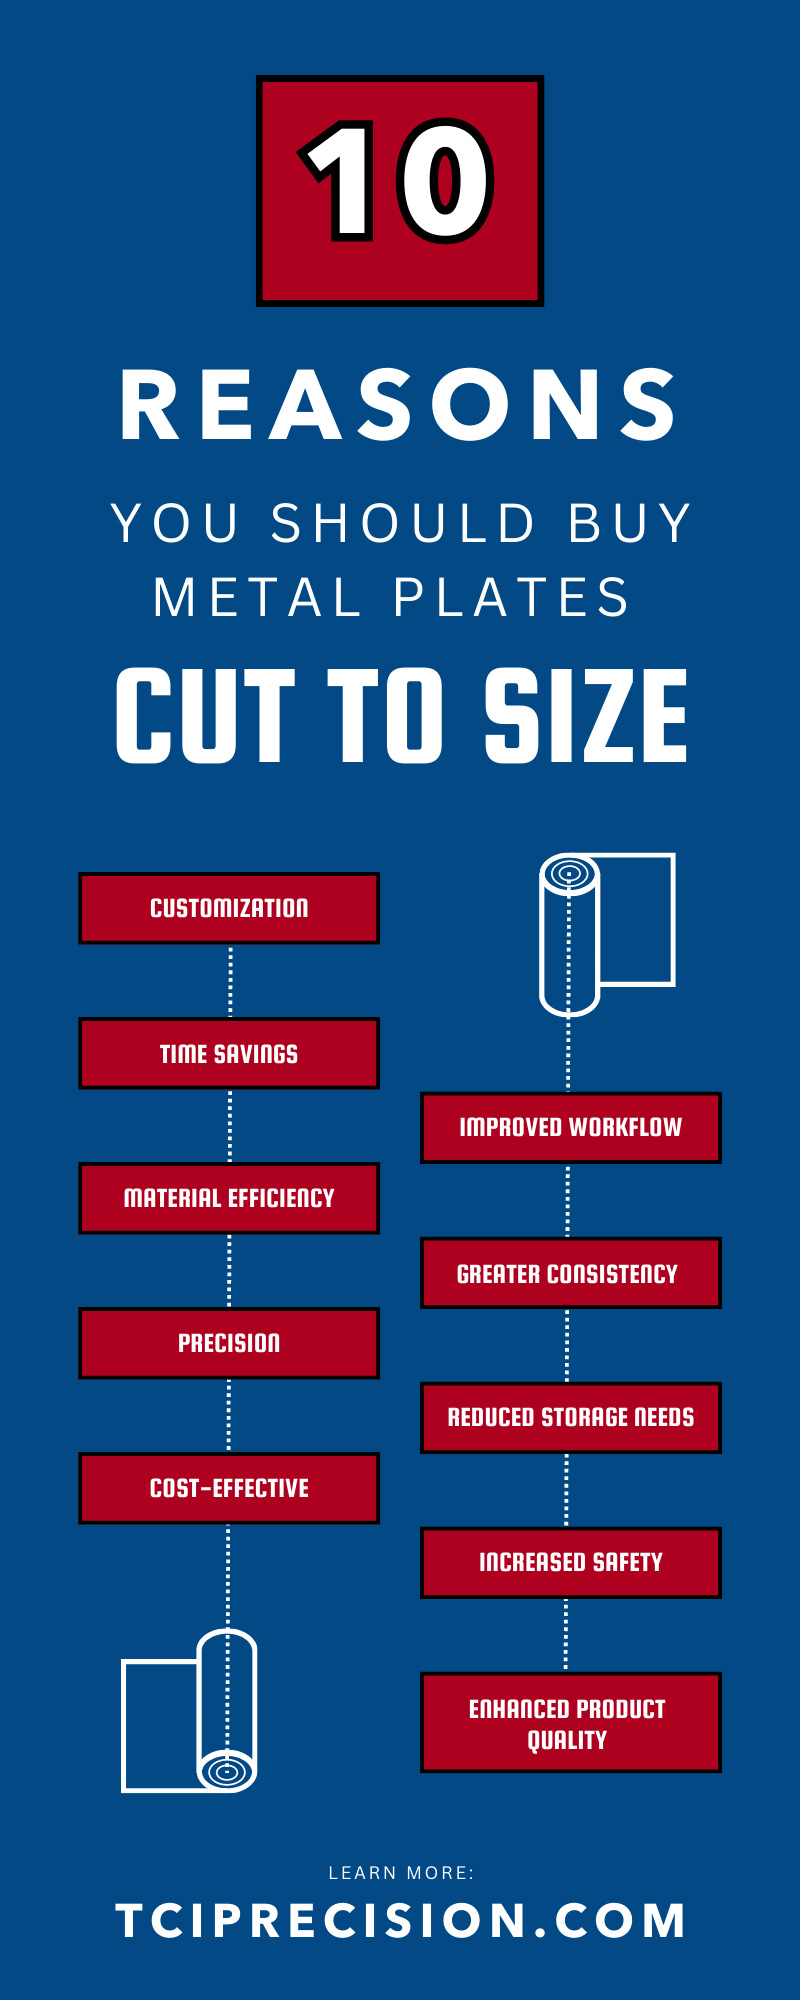 10 Reasons You Should Buy Metal Plates Cut to Size